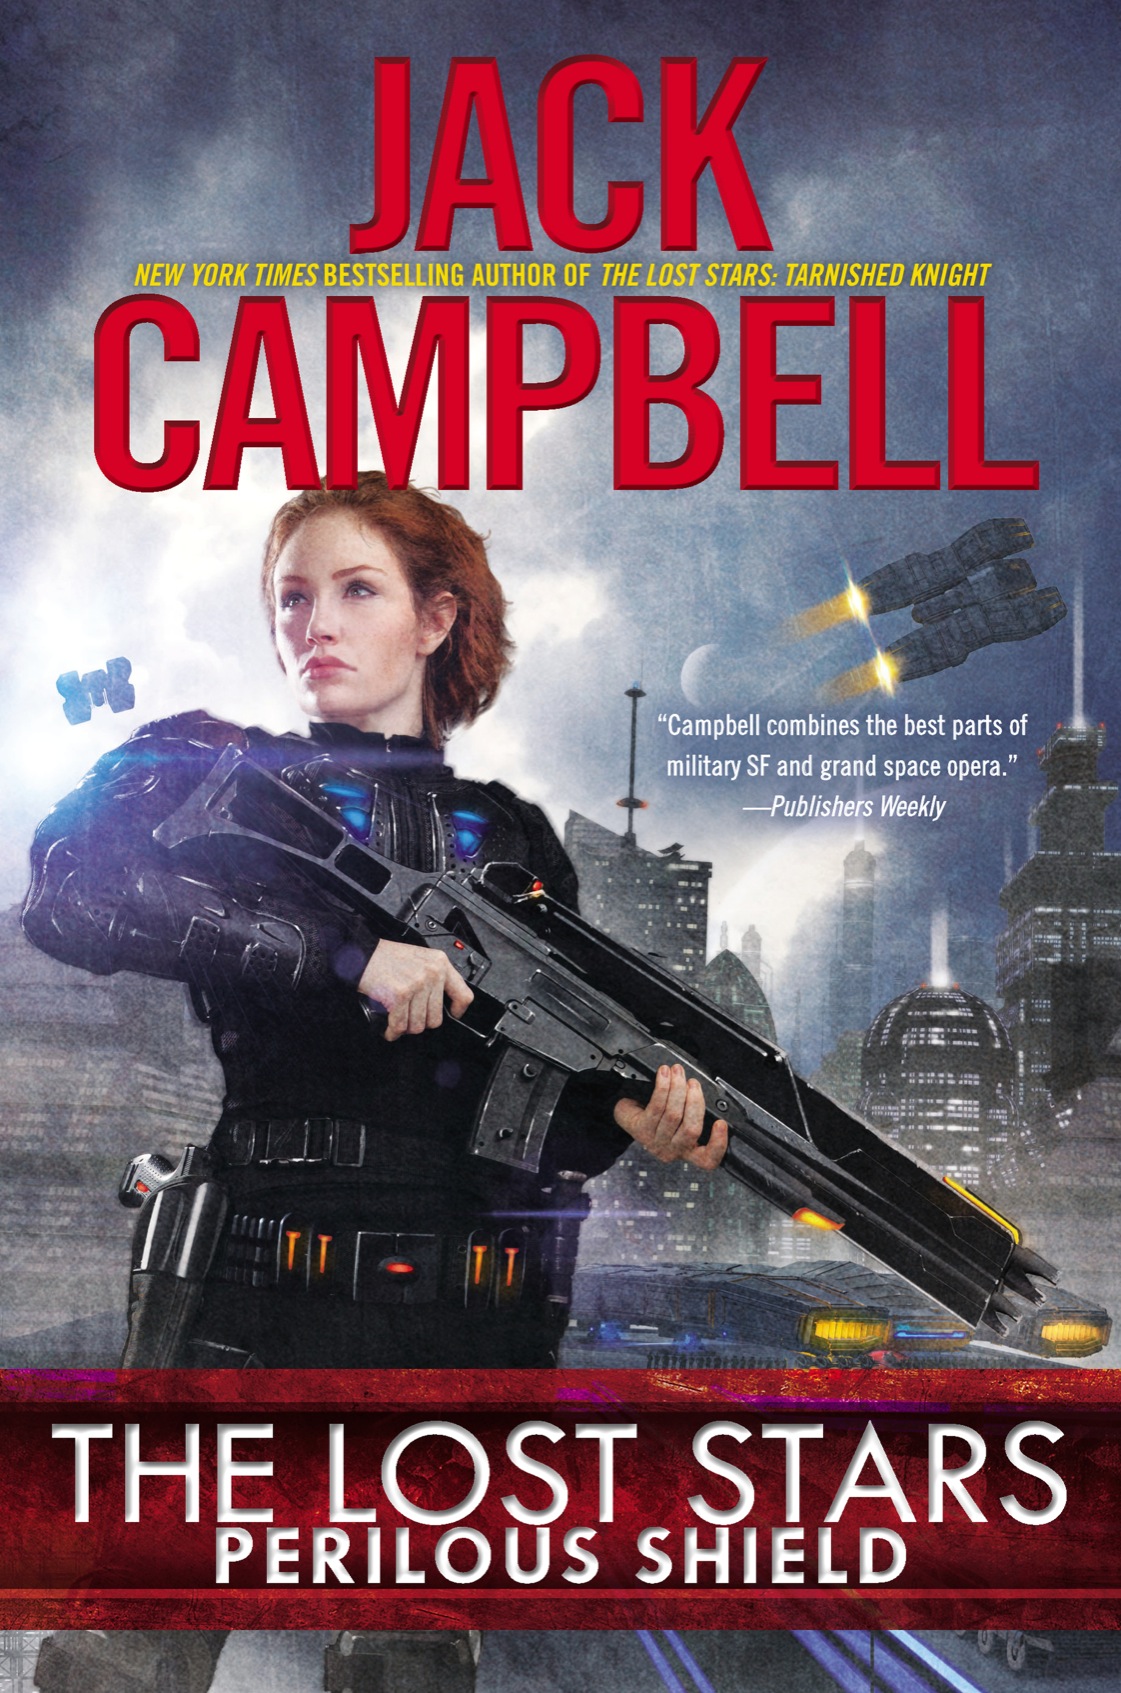 The Lost Stars (2013) by Jack Campbell